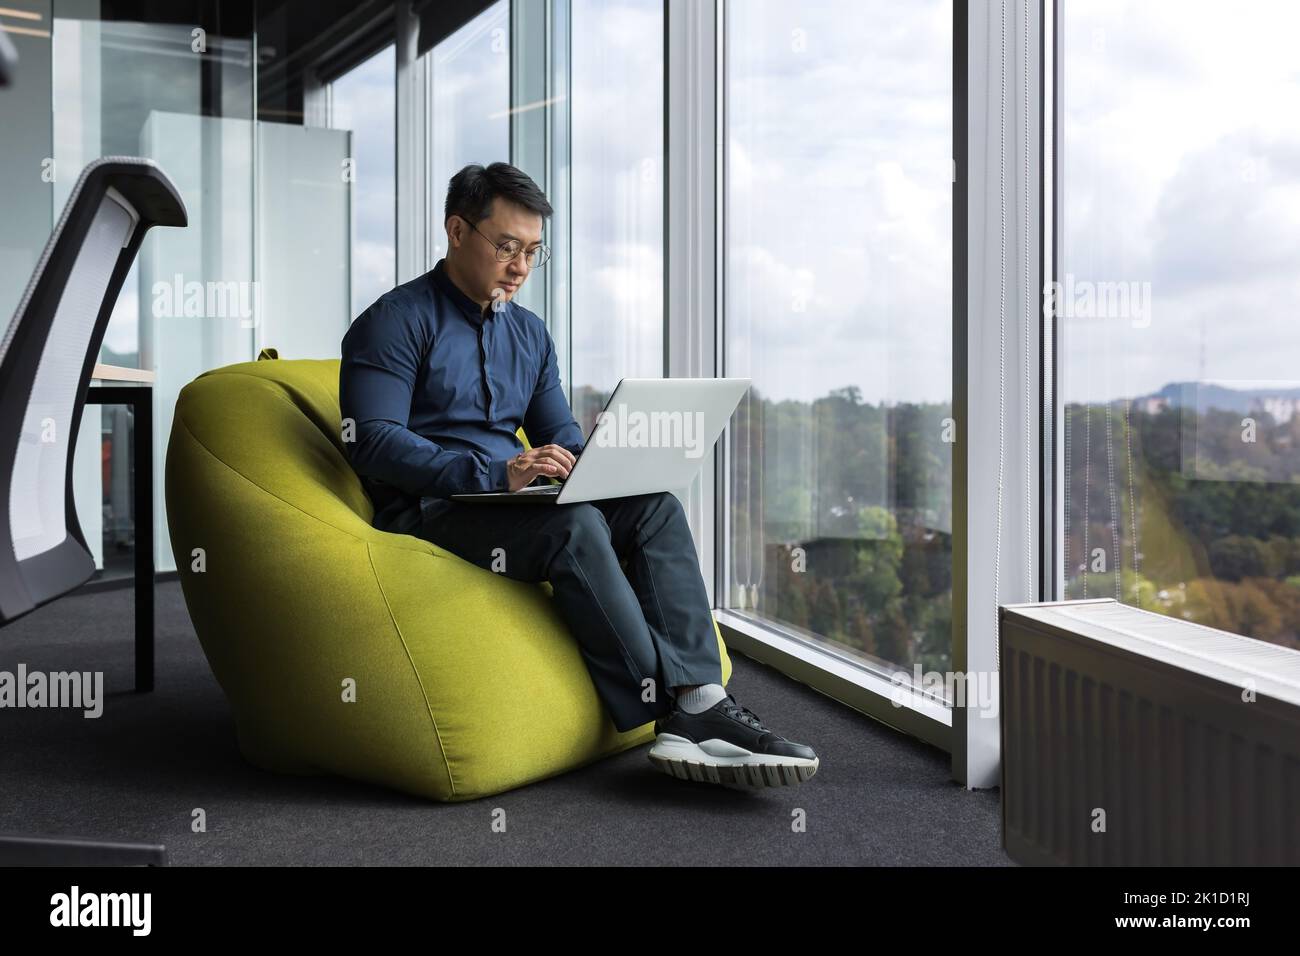 Asian young office worker sitting on soft ottoman chair, programmer using laptop for writing code and programming testing new program, man sitting near window inside office. Stock Photo